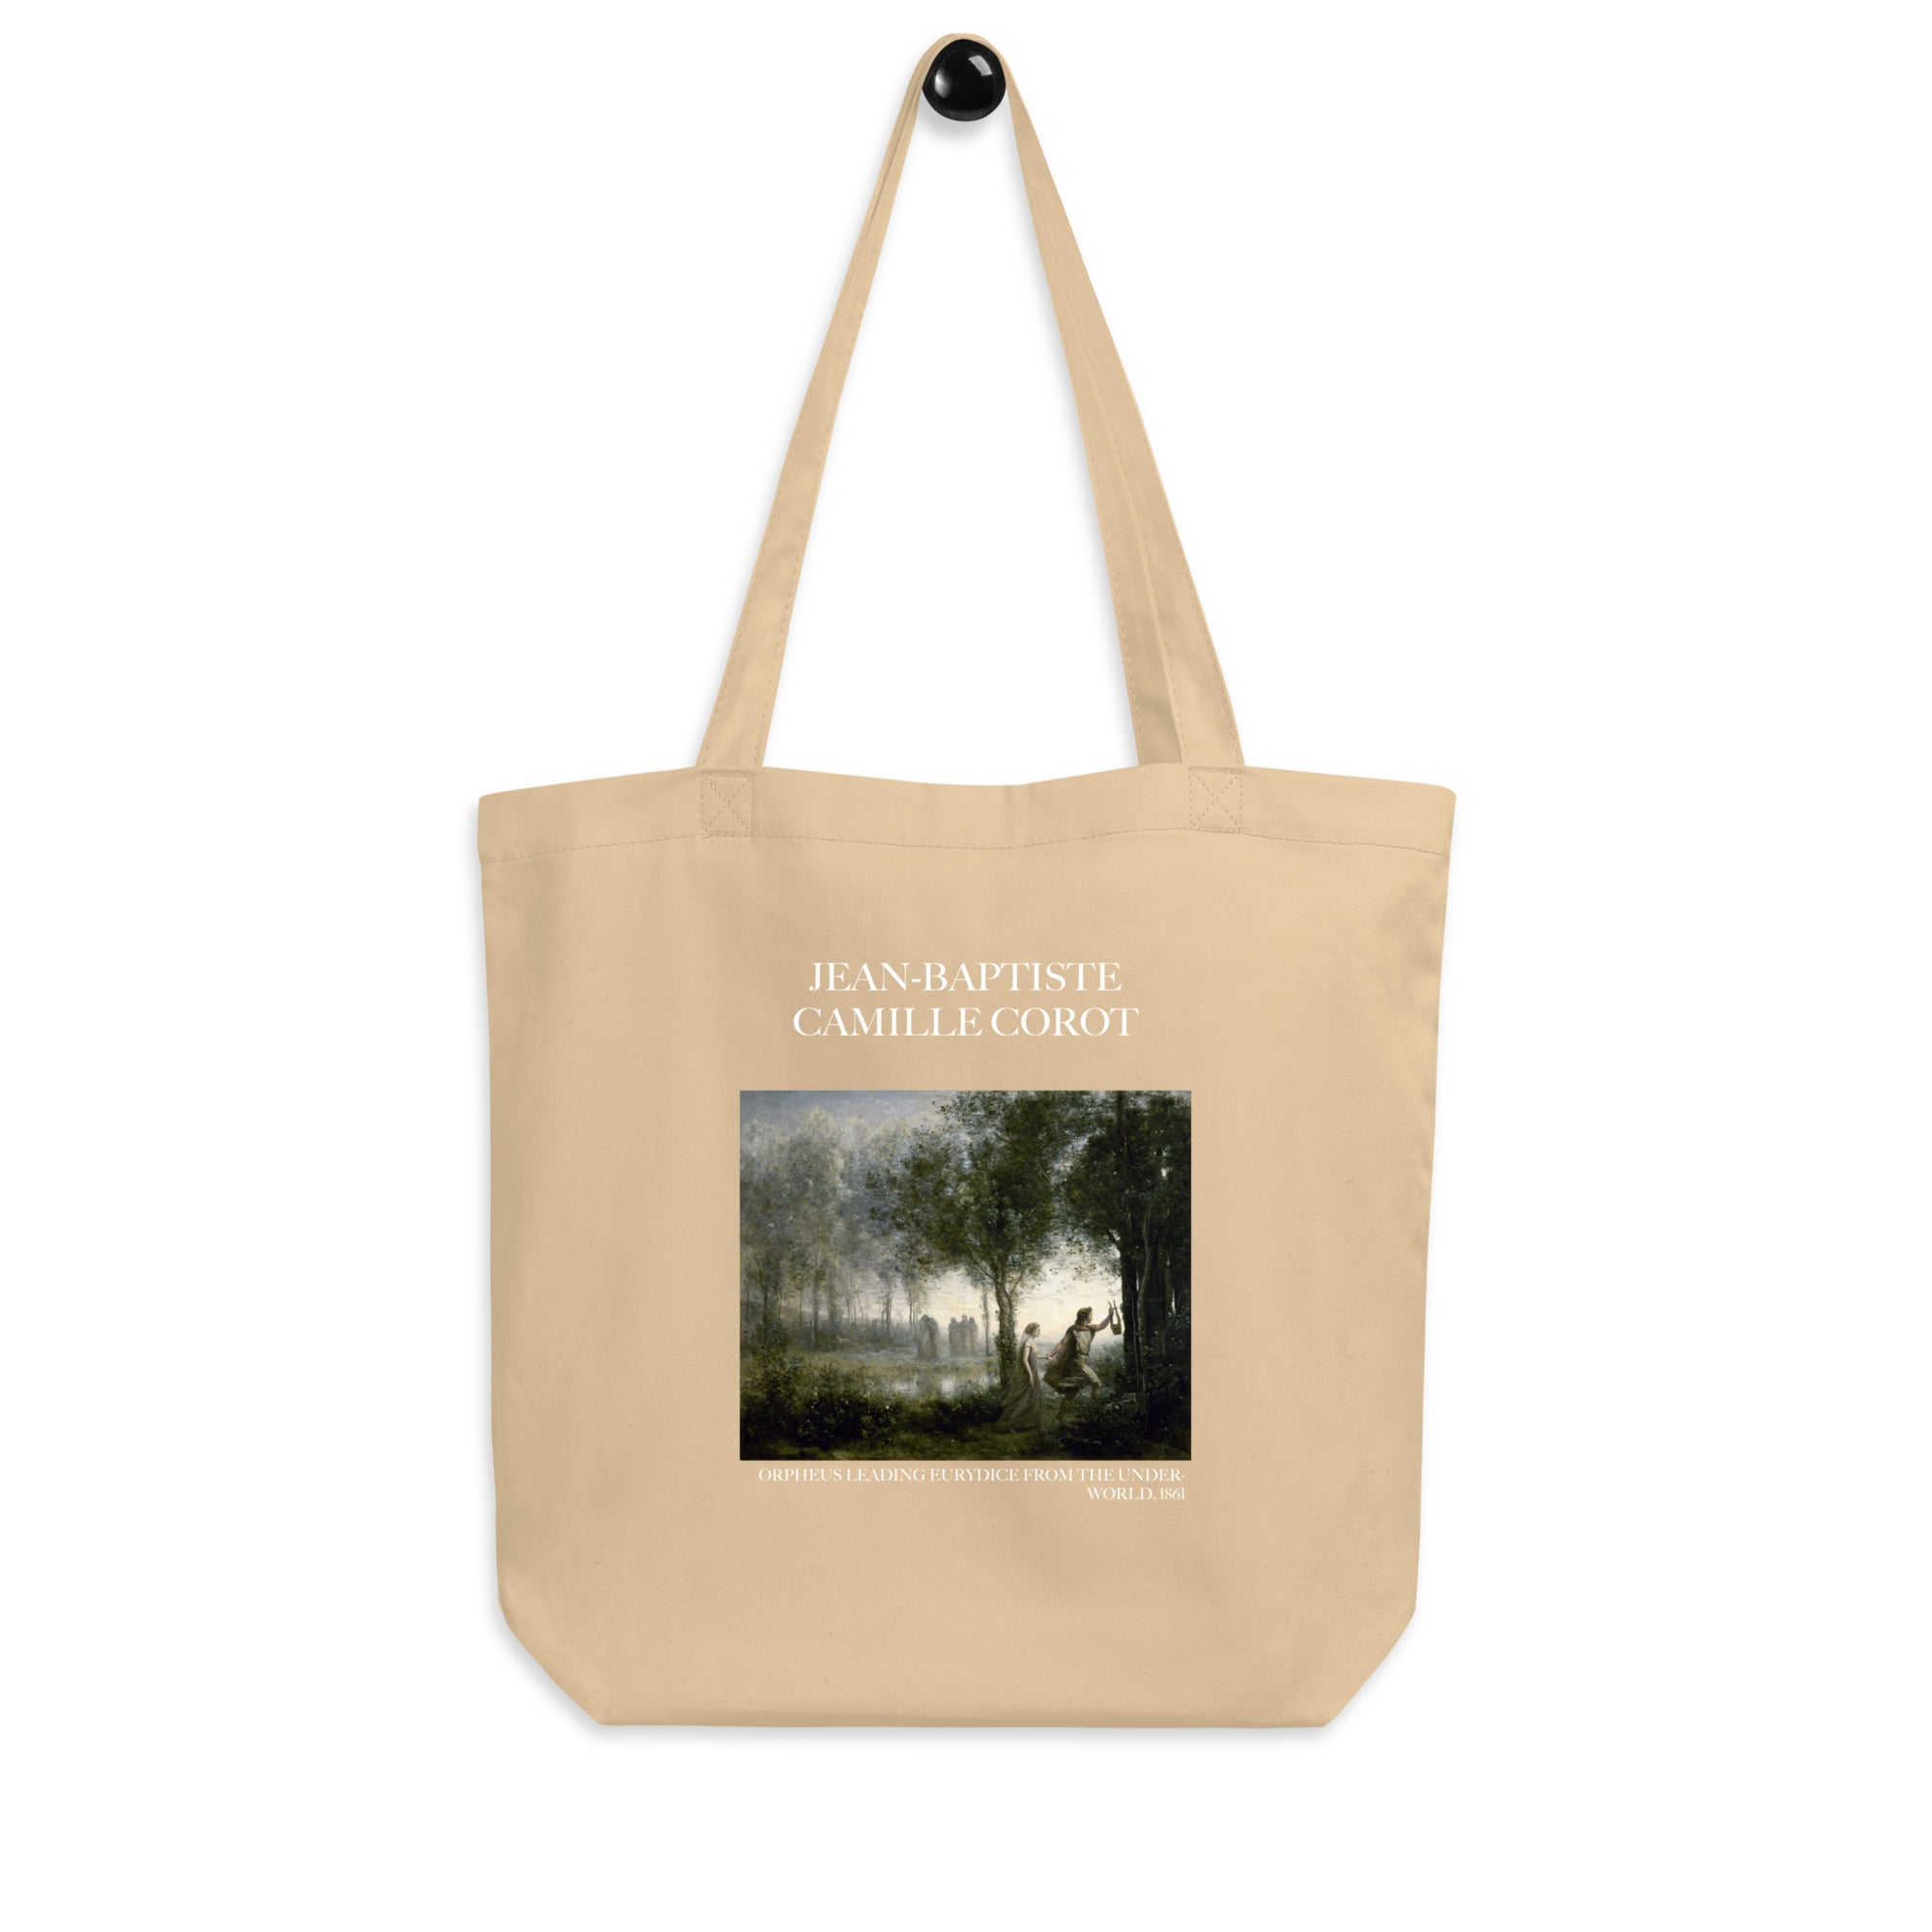 Jean-Baptiste Camille Corot 'Orpheus Leading Eurydice from the Underworld' Famous Painting Totebag | Eco Friendly Art Tote Bag